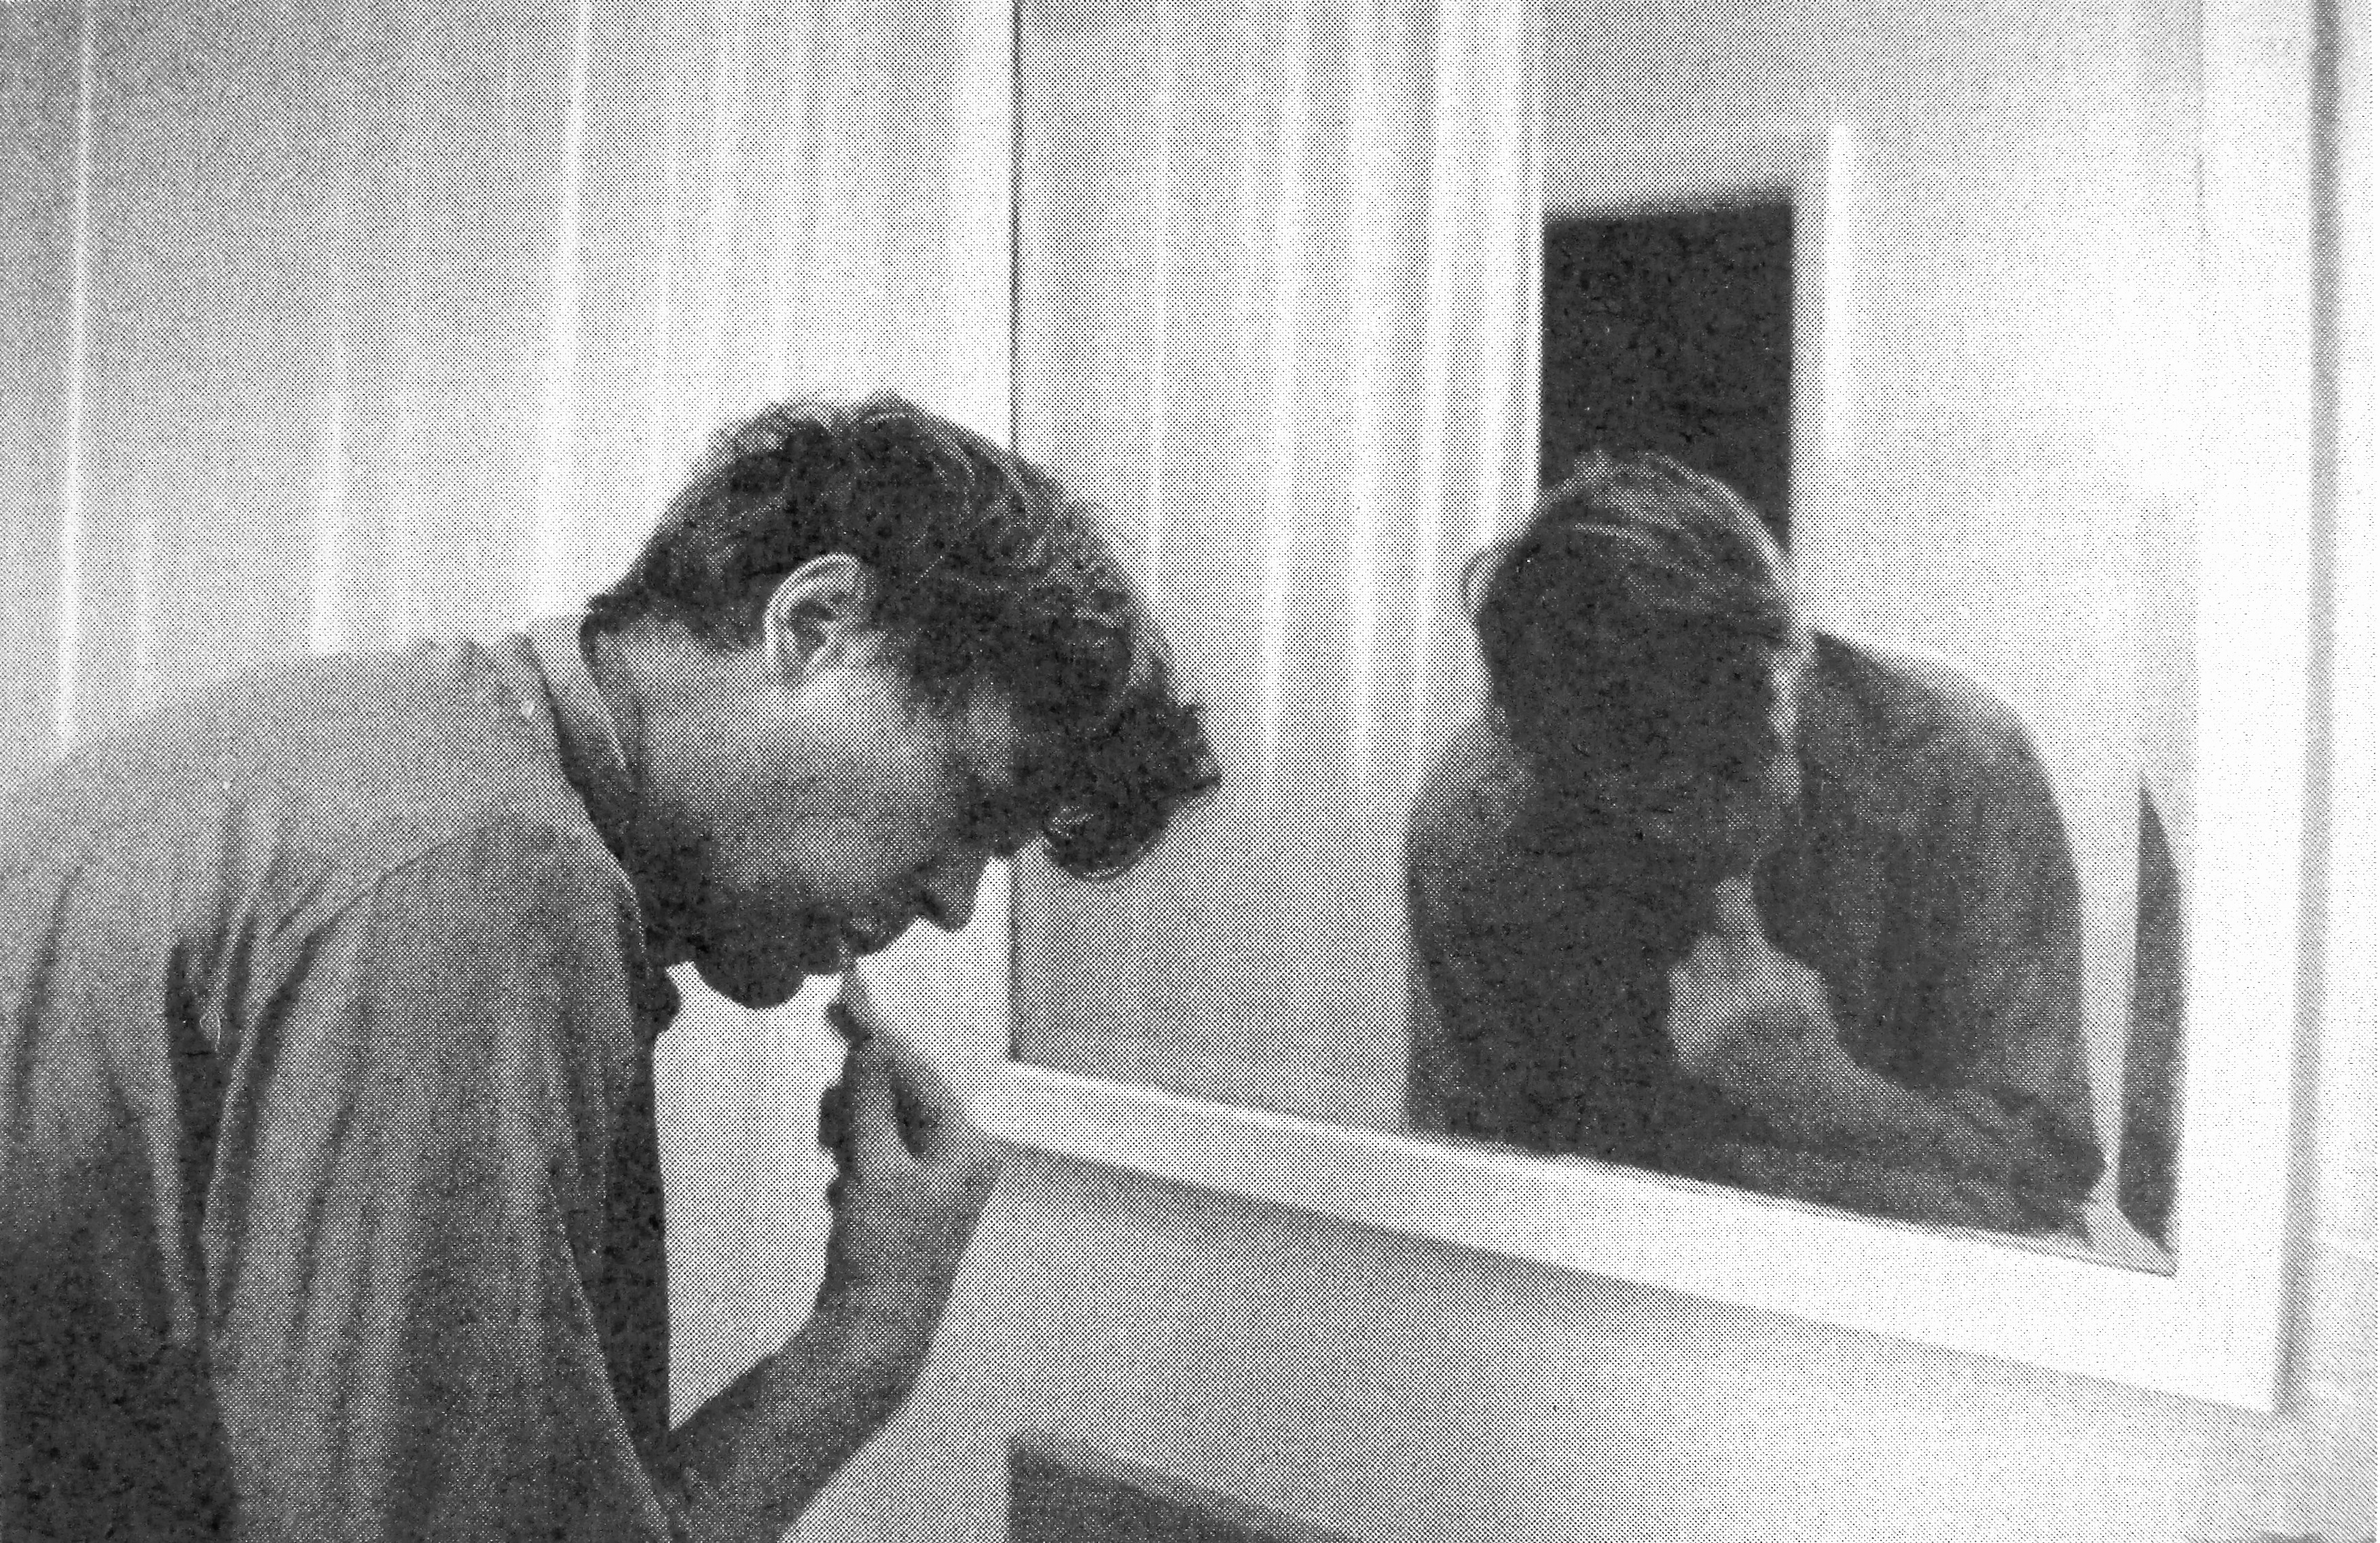 A man (Charles Allcroft)  brushes his teeth in front of a bathroom sink and mirror.